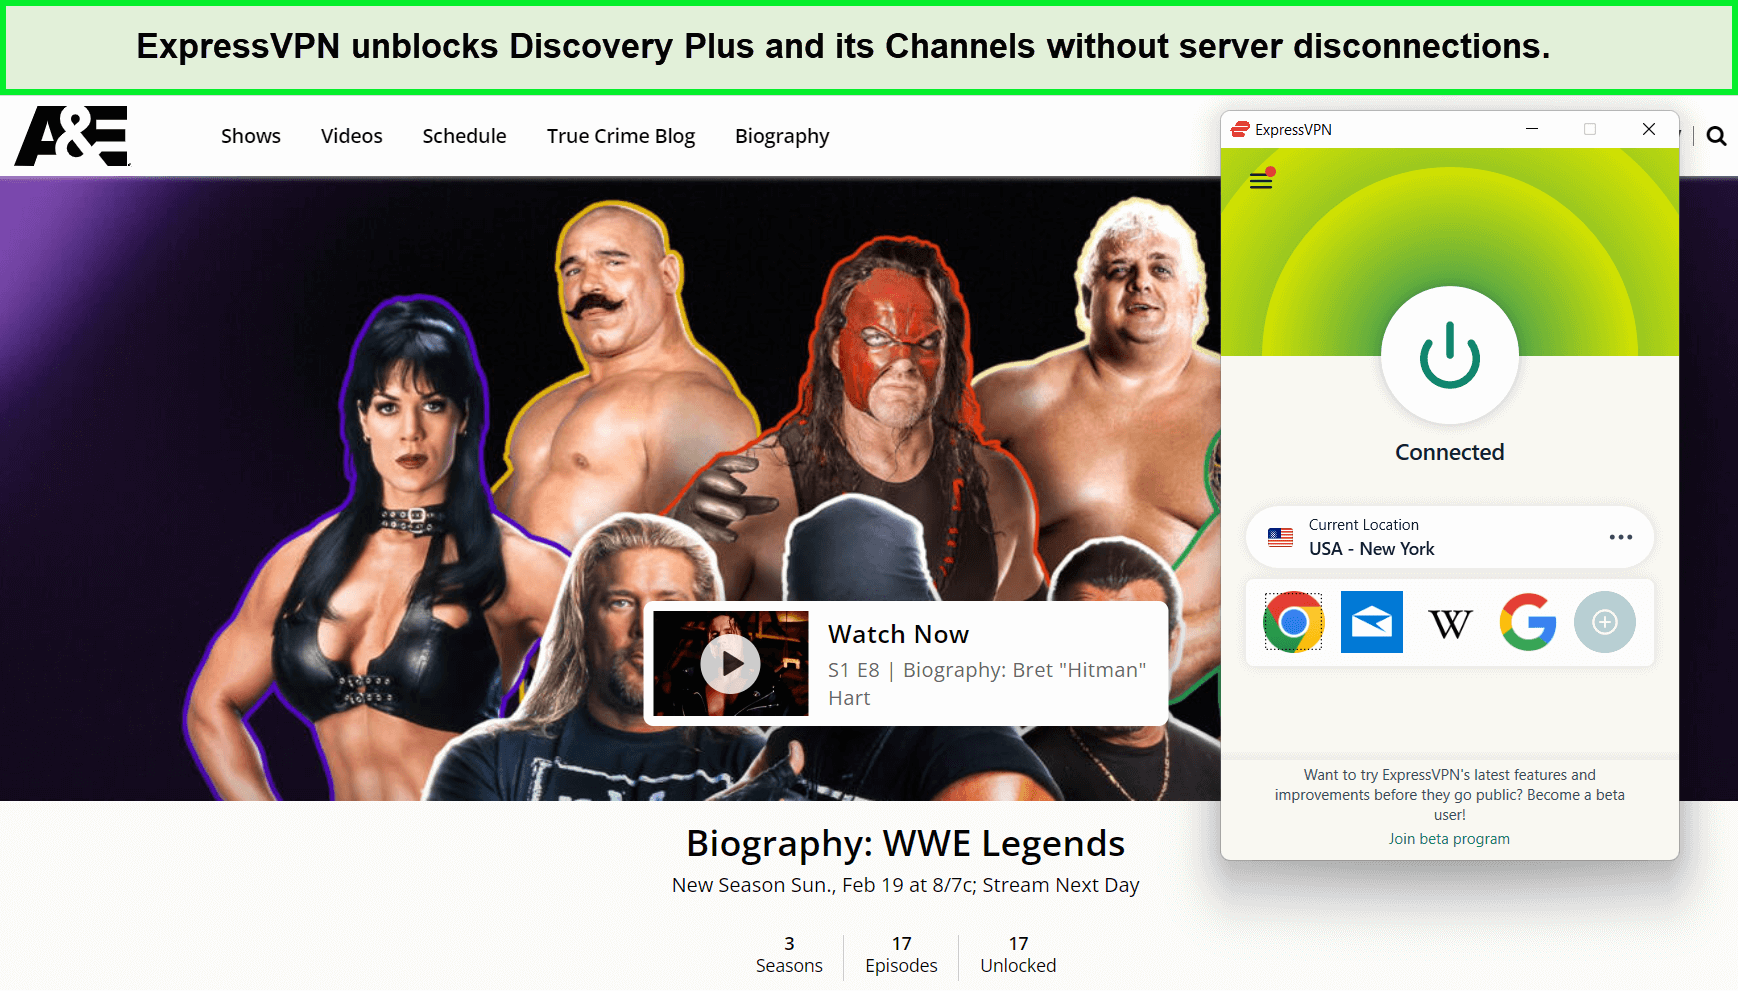 expressvpn-unblocks-biography-wwe-legends-on-discovery-plus-via-a-and-e-channel